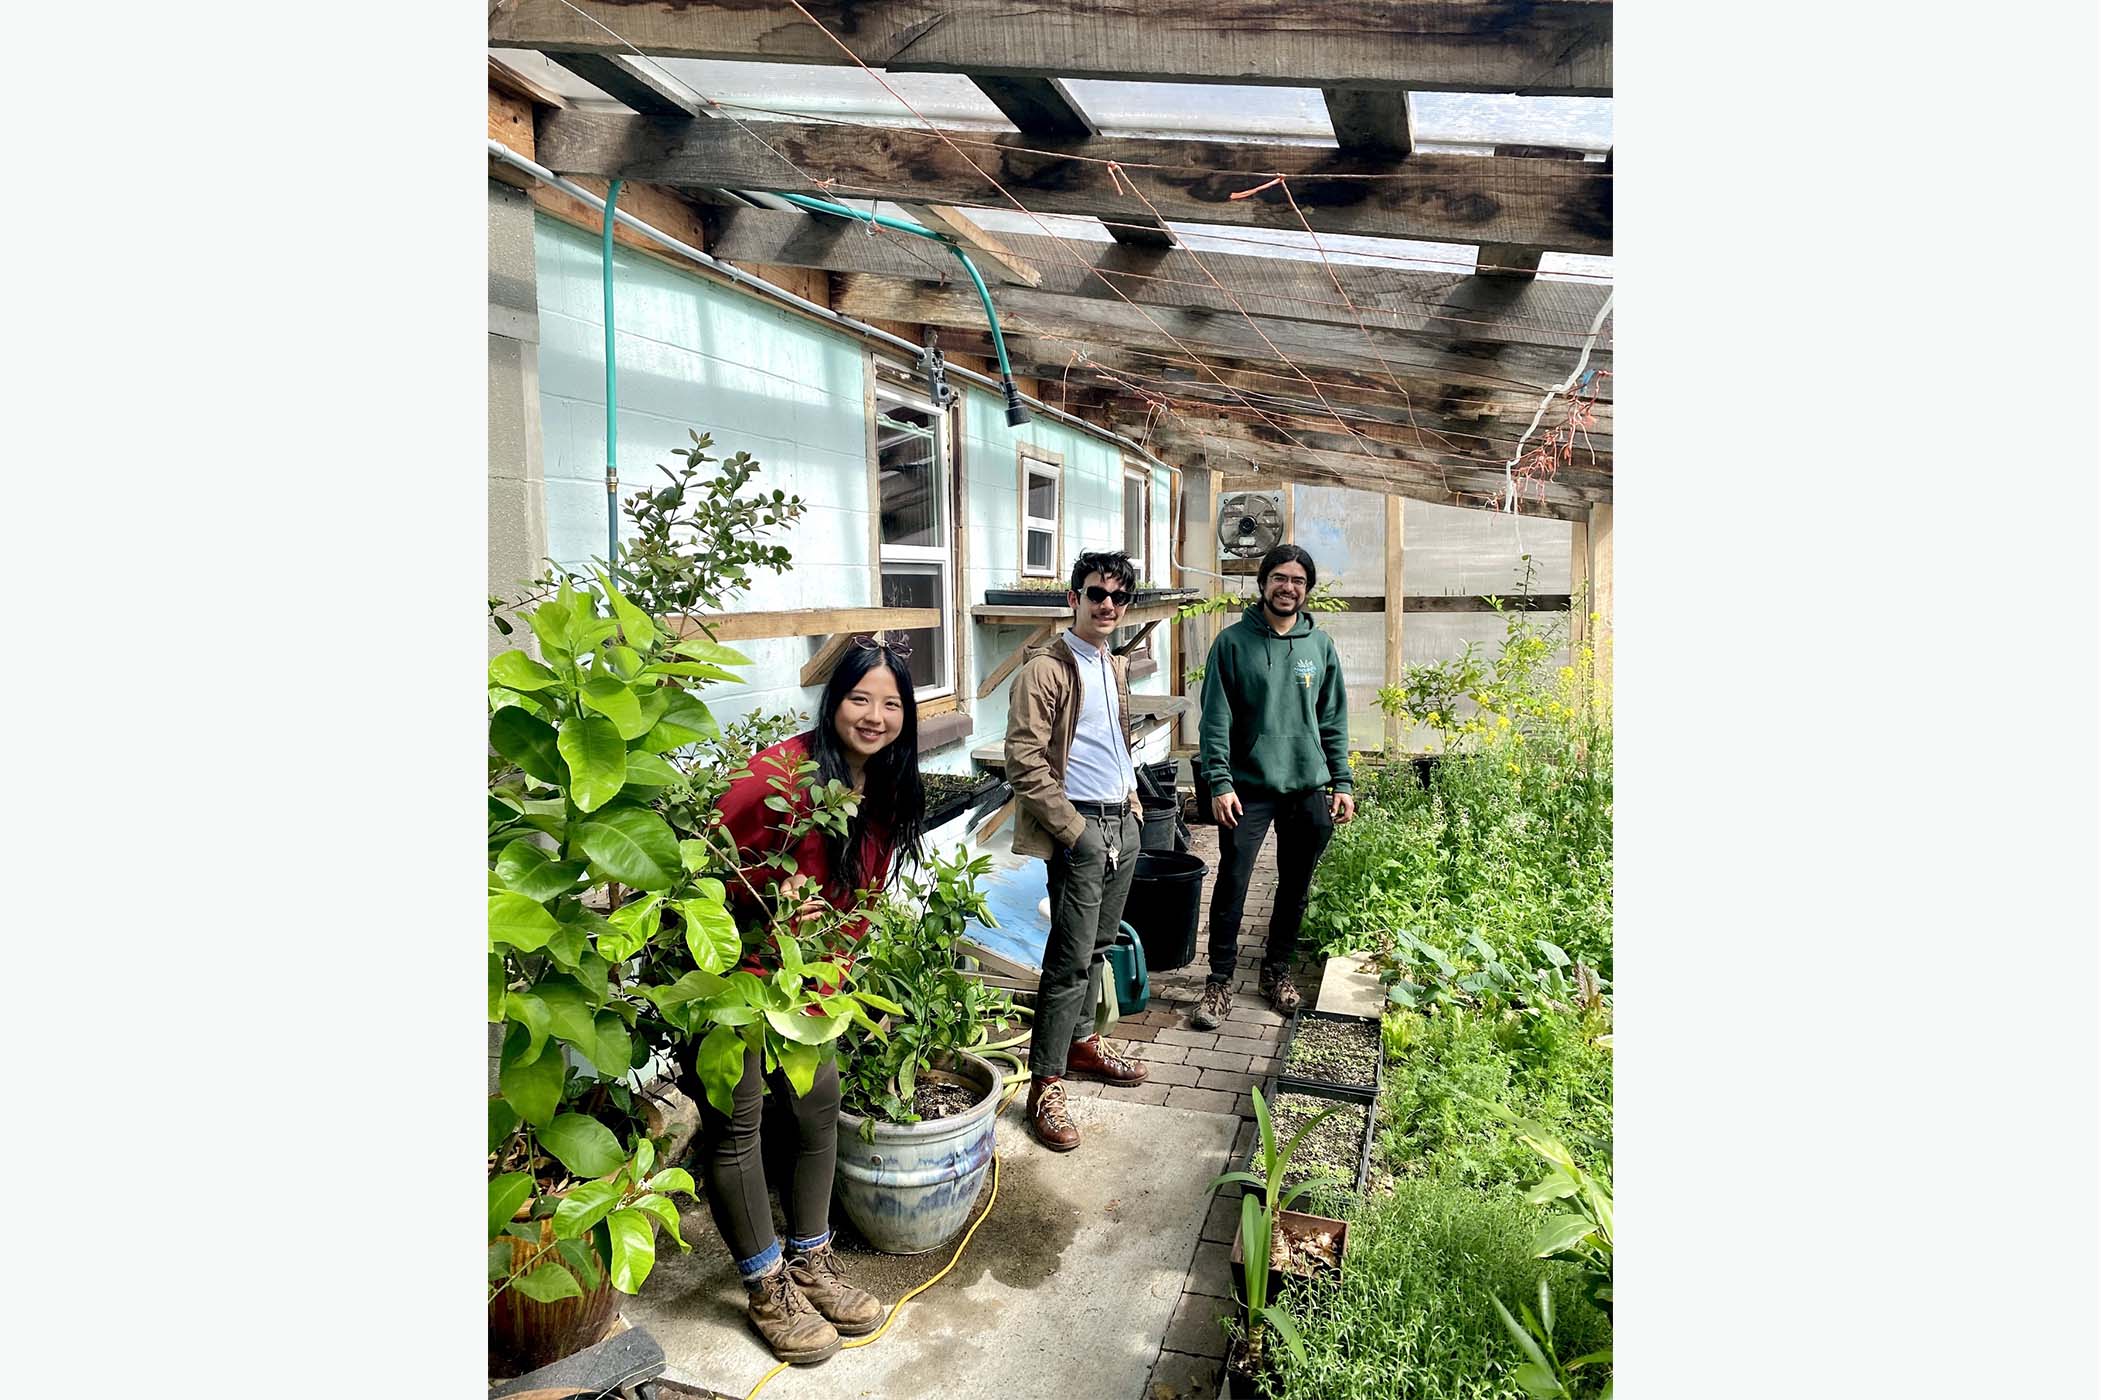 Ash Teng, Nic Garza and Enrique Hernandez standing in a staggered row inside a greenhouse, facing camera